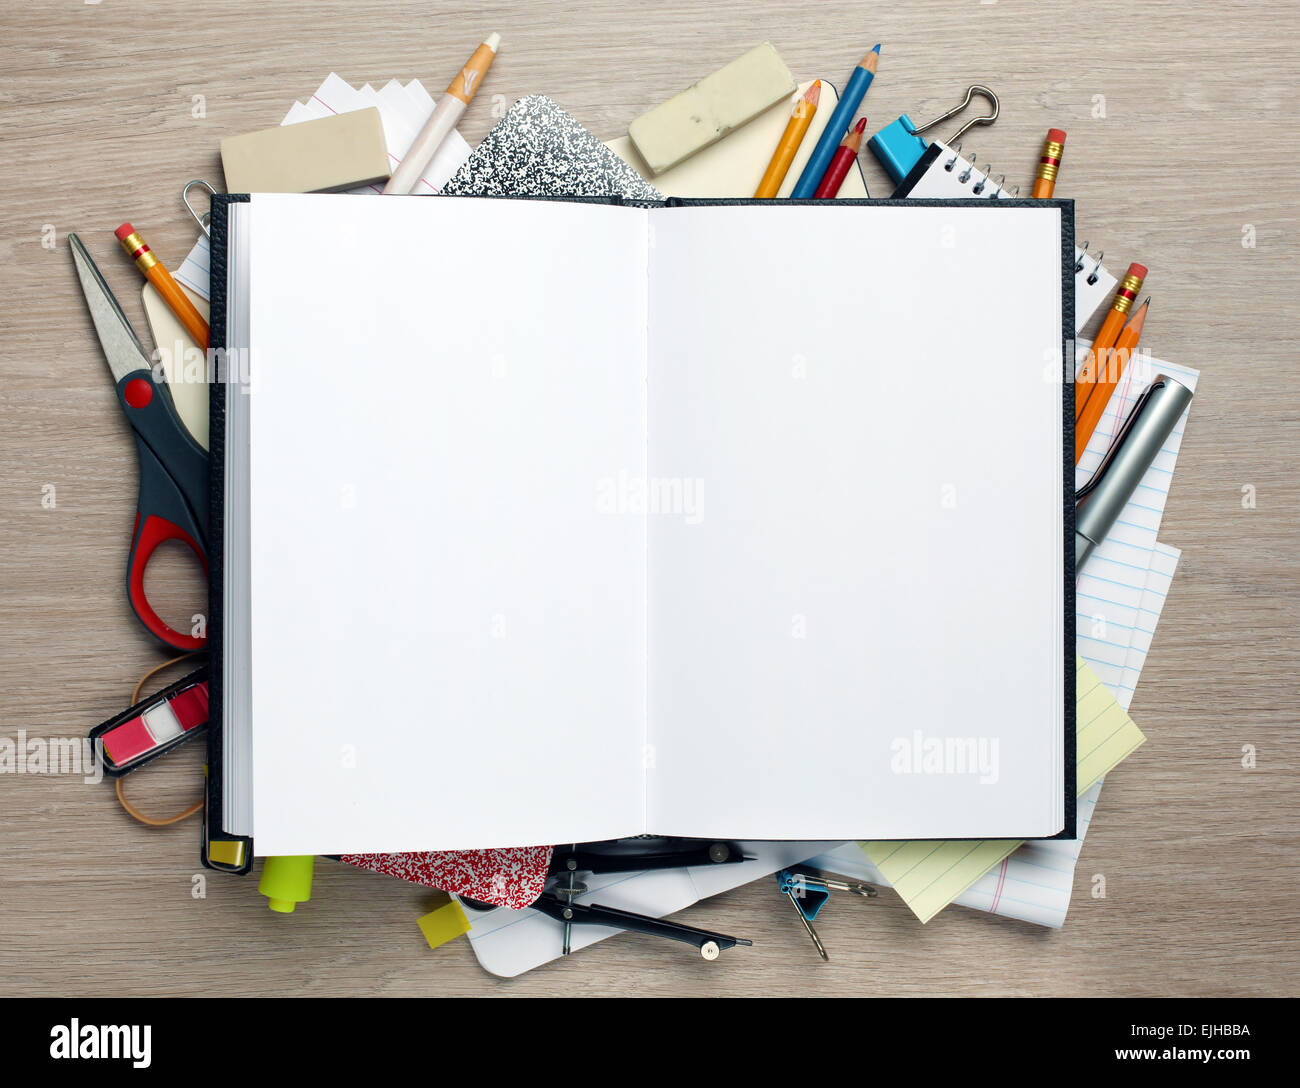 Open book with office supplies Stock Photo